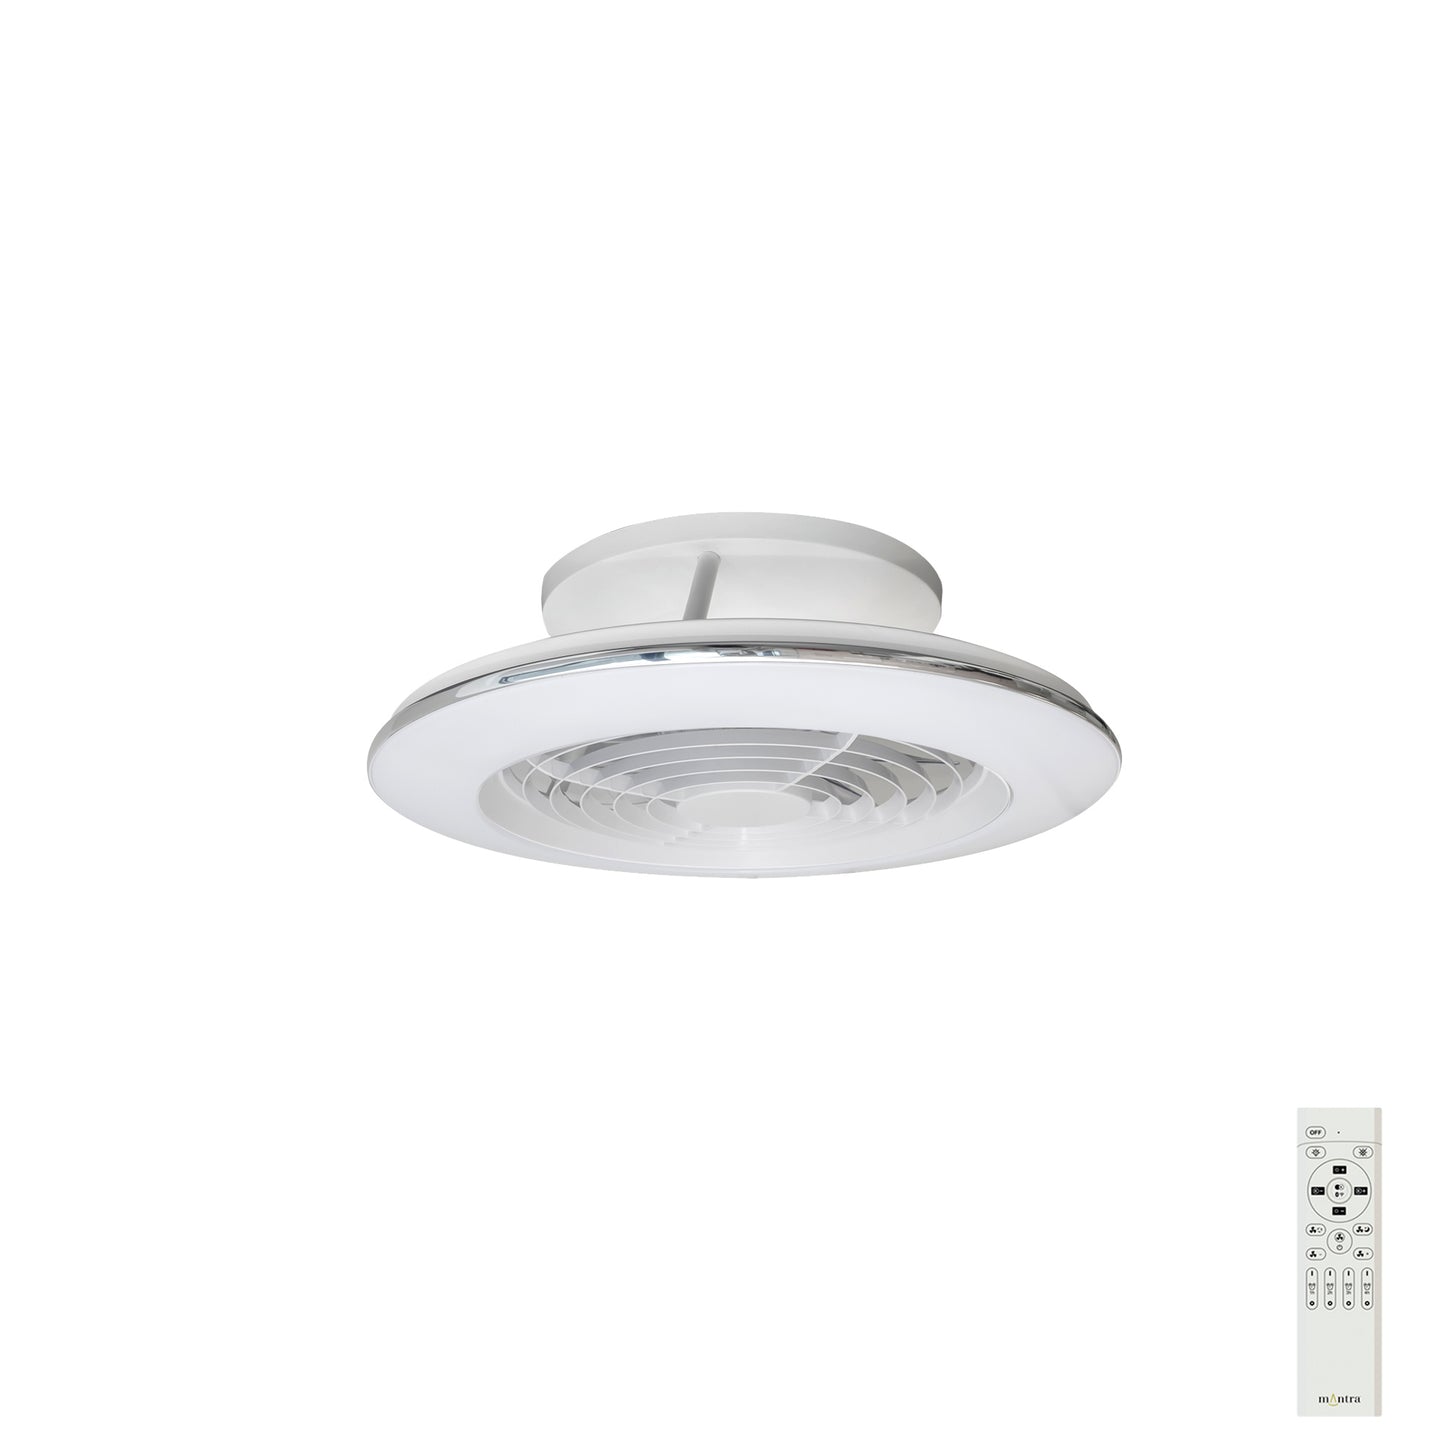 MINI Alisio LED Dimmable Ceiling Light With Built-In Fan - Remote Control